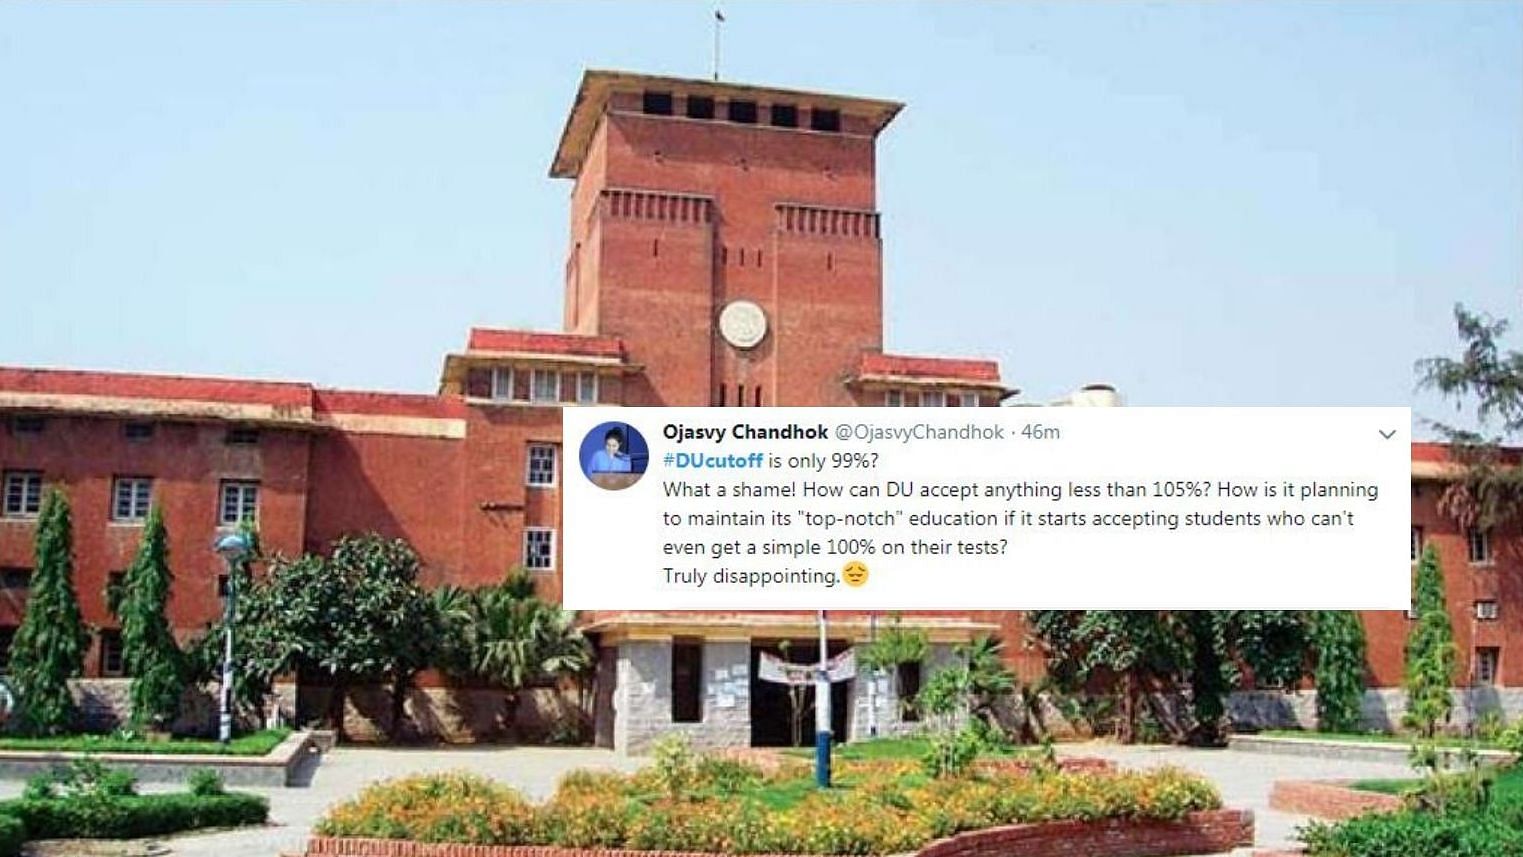 Twitter was abuzz with discussion around the ‘impossible’ marks that students have to achieve for admissions in DU.